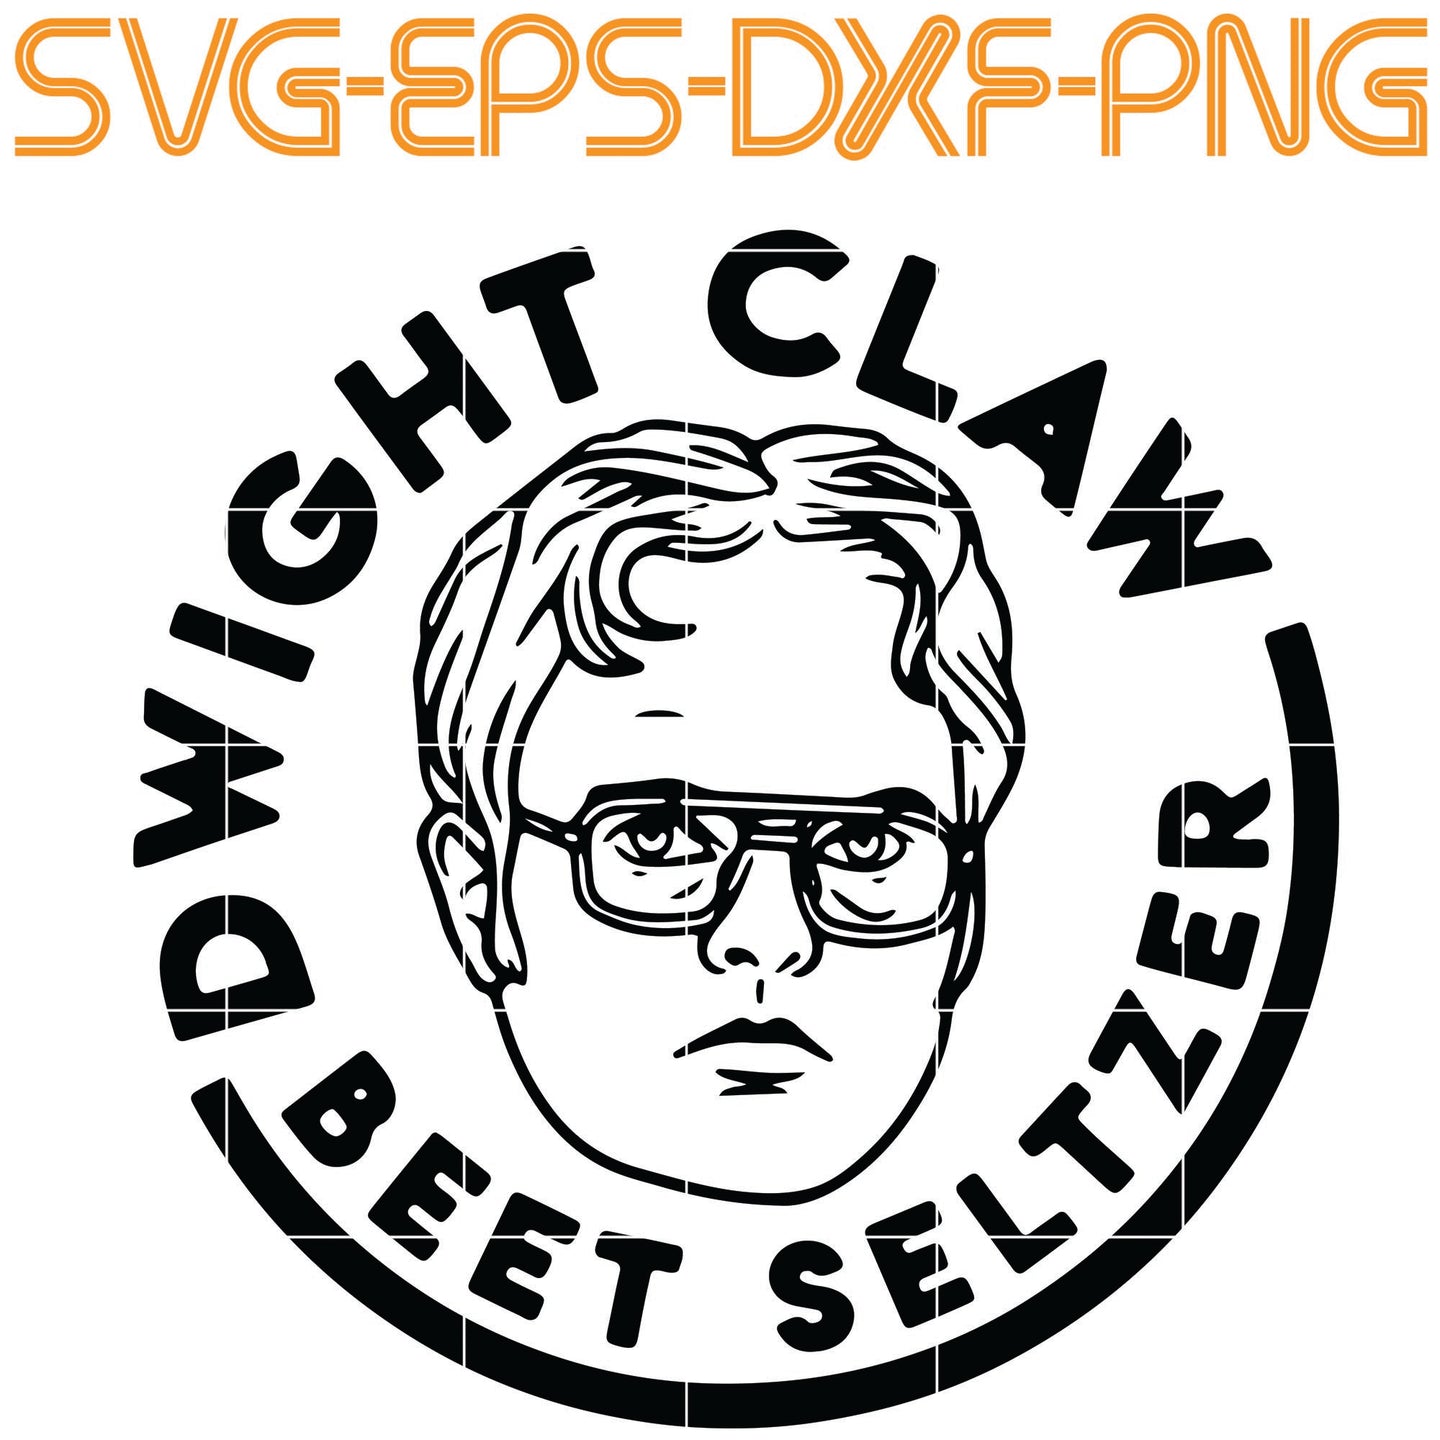 Dwight Schrute Dwight Claw beet seltzer SVG , PNG, EPS ...